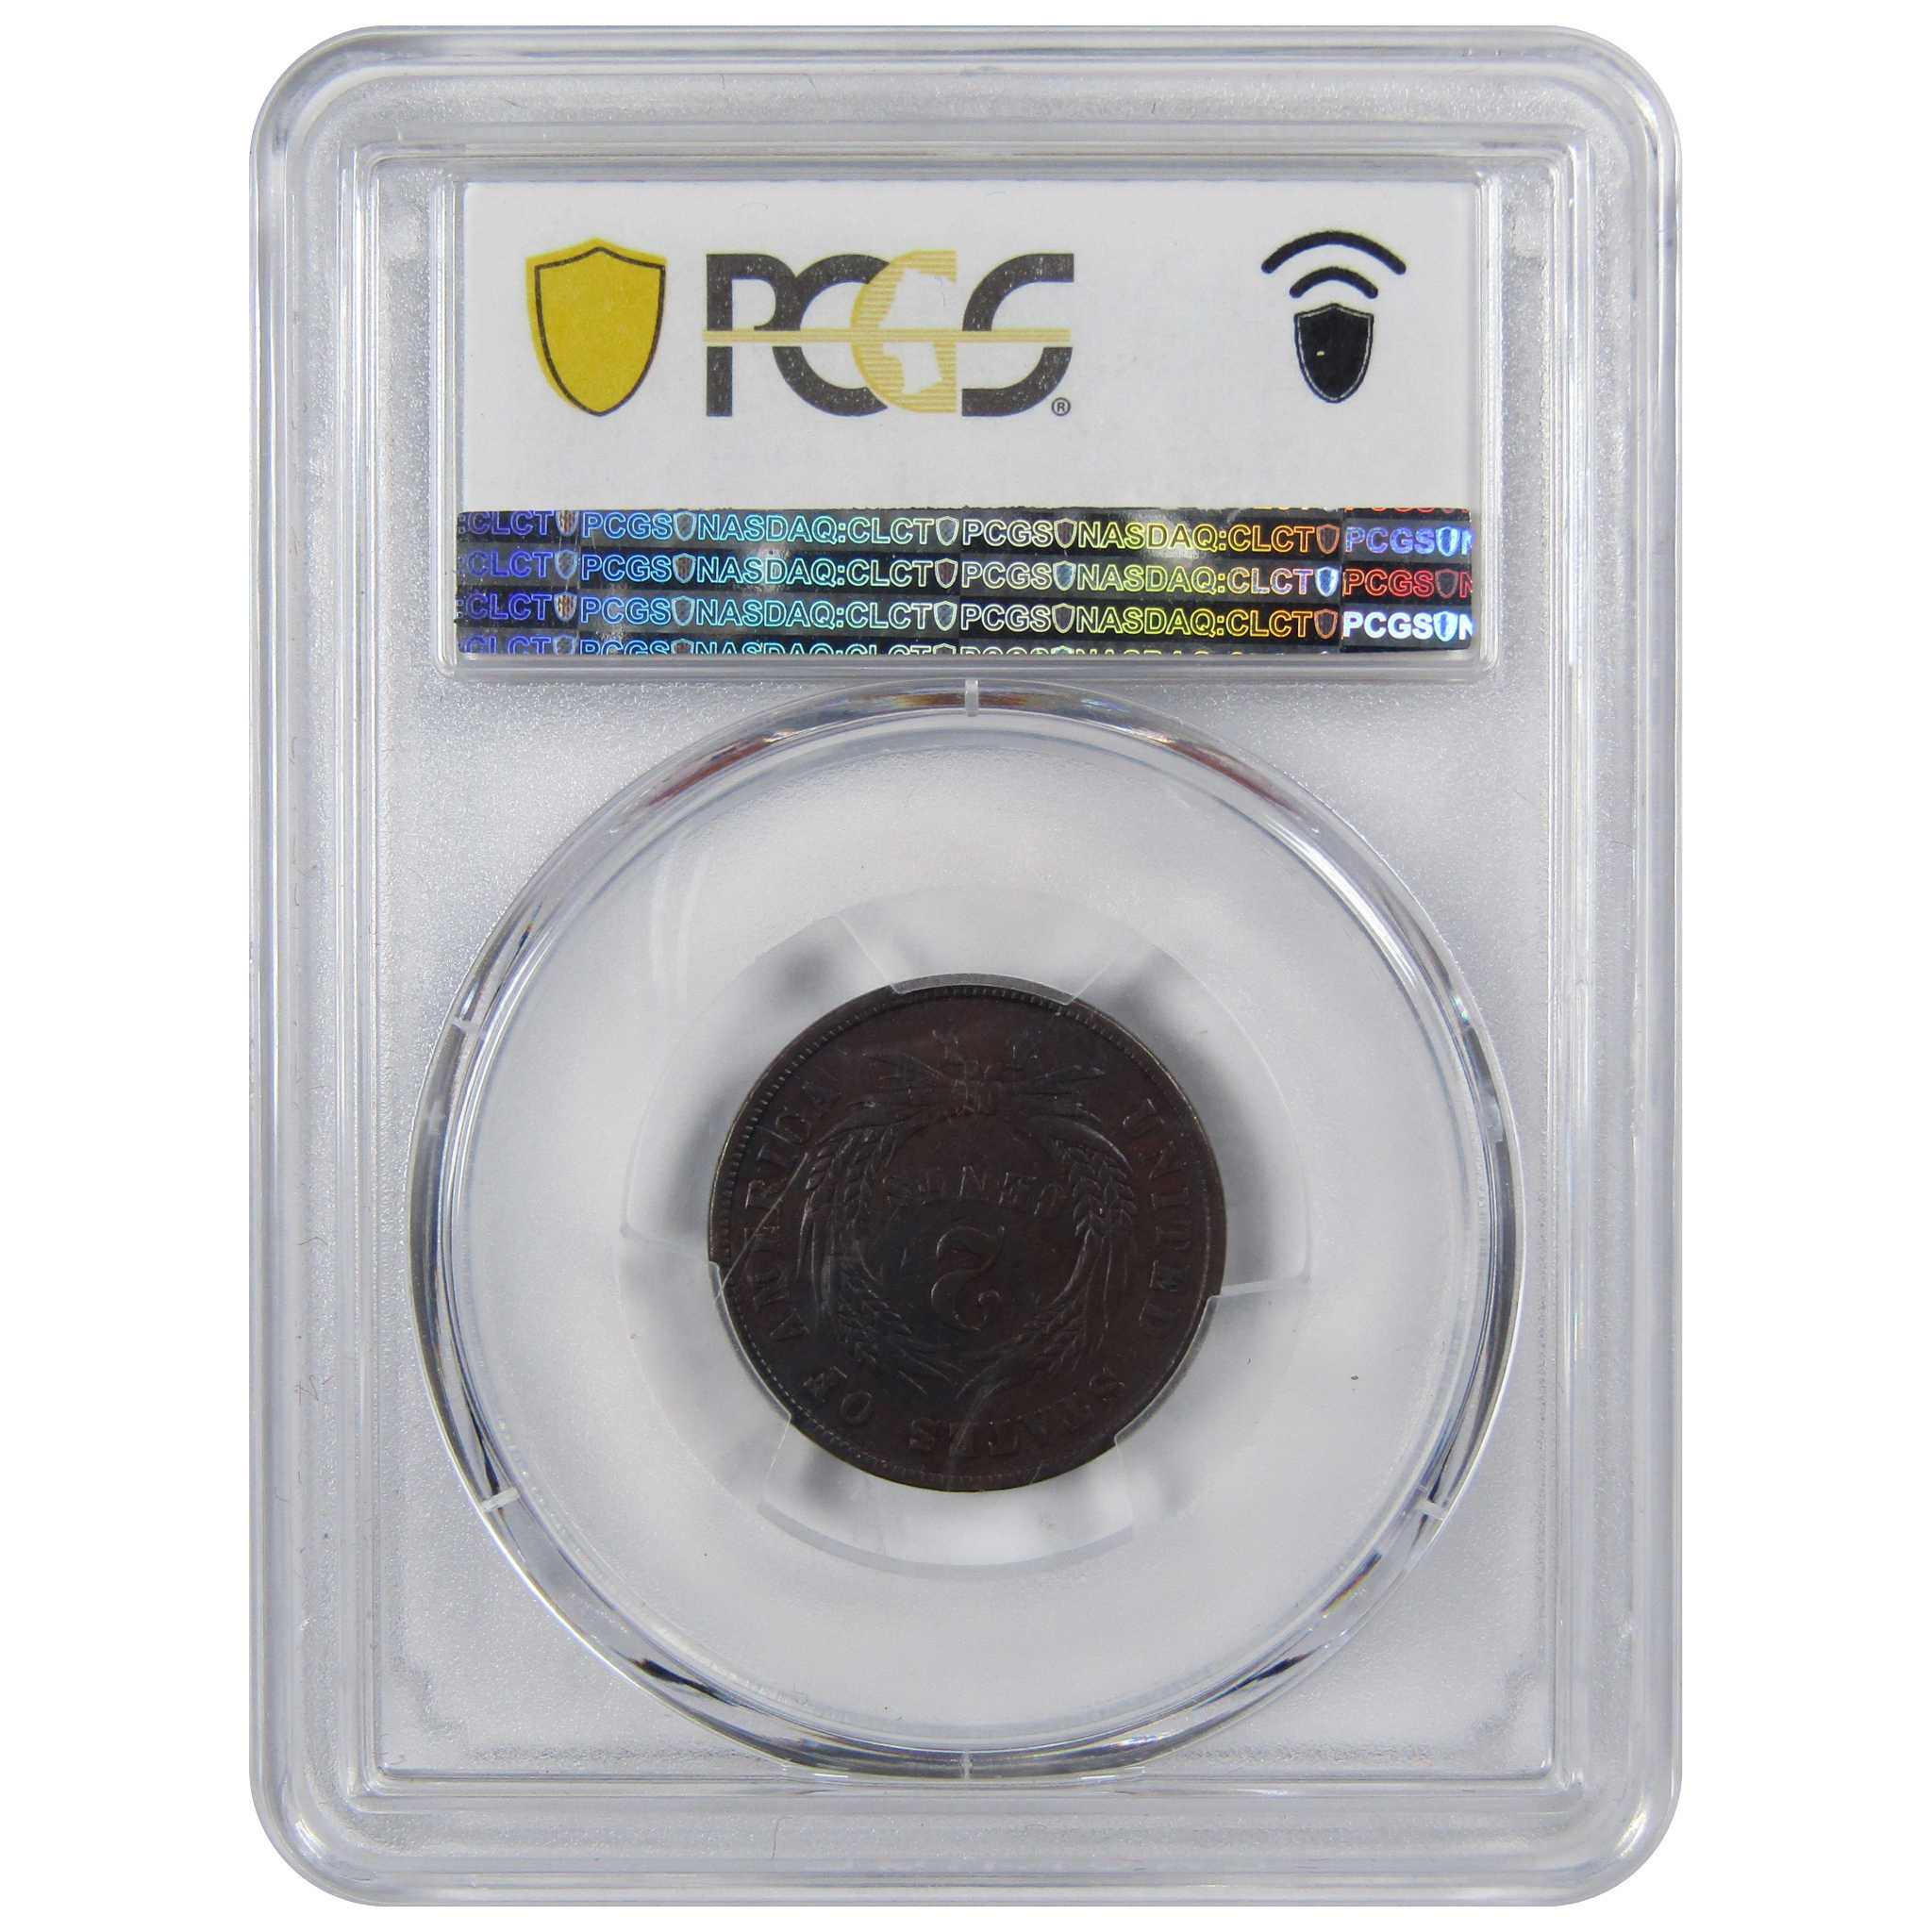 1864 Small Motto Two Cent Piece VF 30 PCGS 2c US Type Coin SKU:I874